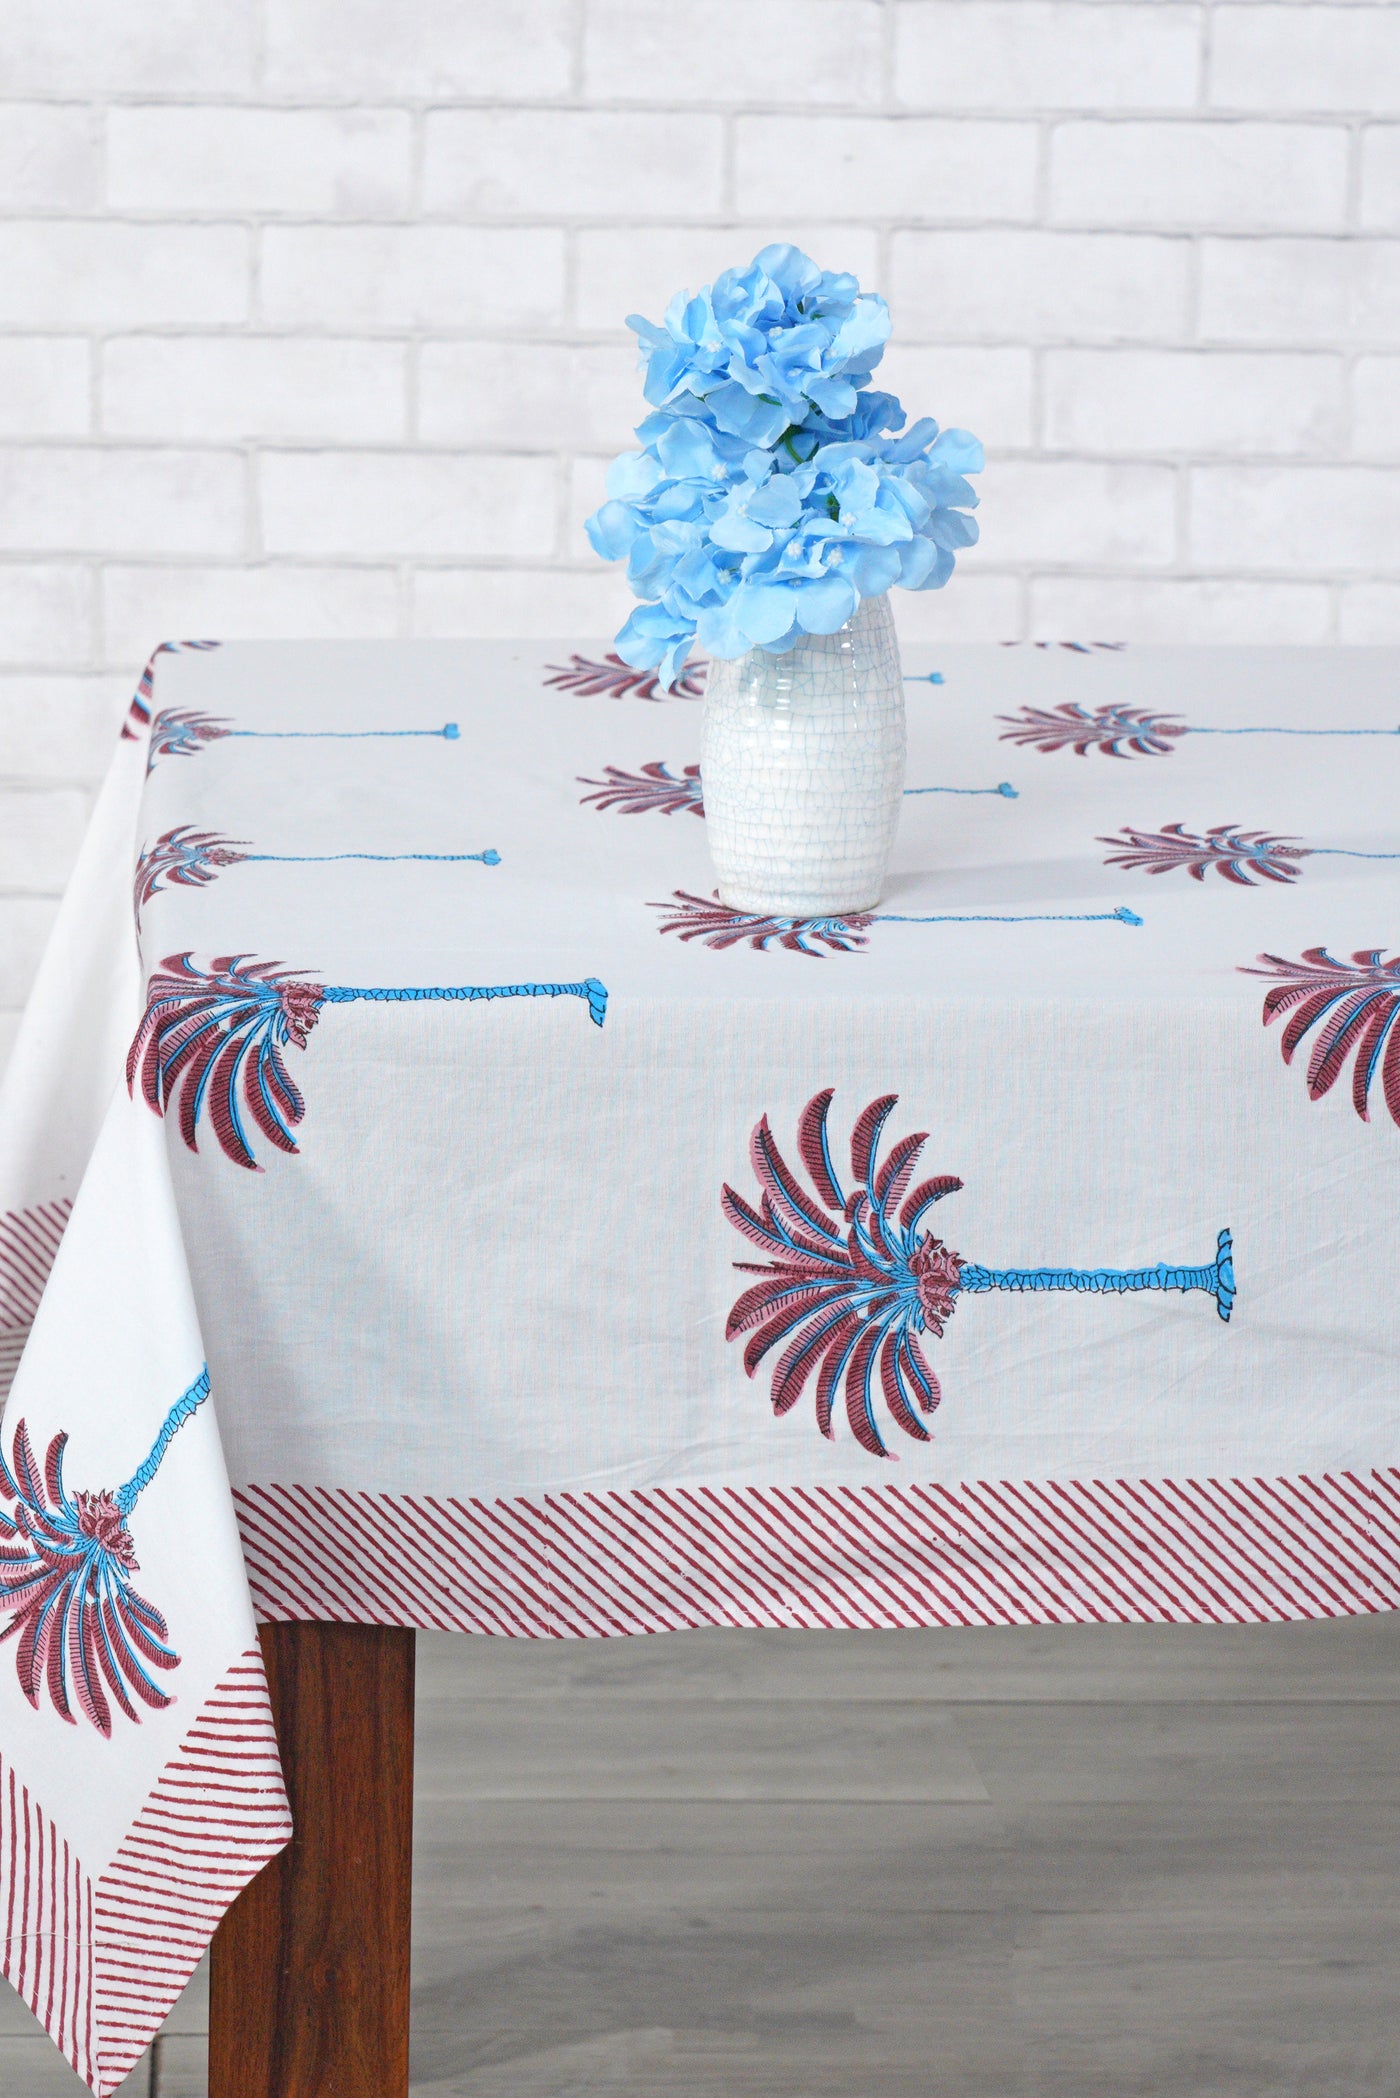 Fabricrush Palm Hand Block Print Table Cloth Table Cover Linen Set Gift For Mom Gift For Her Thanks Giving Easter Tablecloth